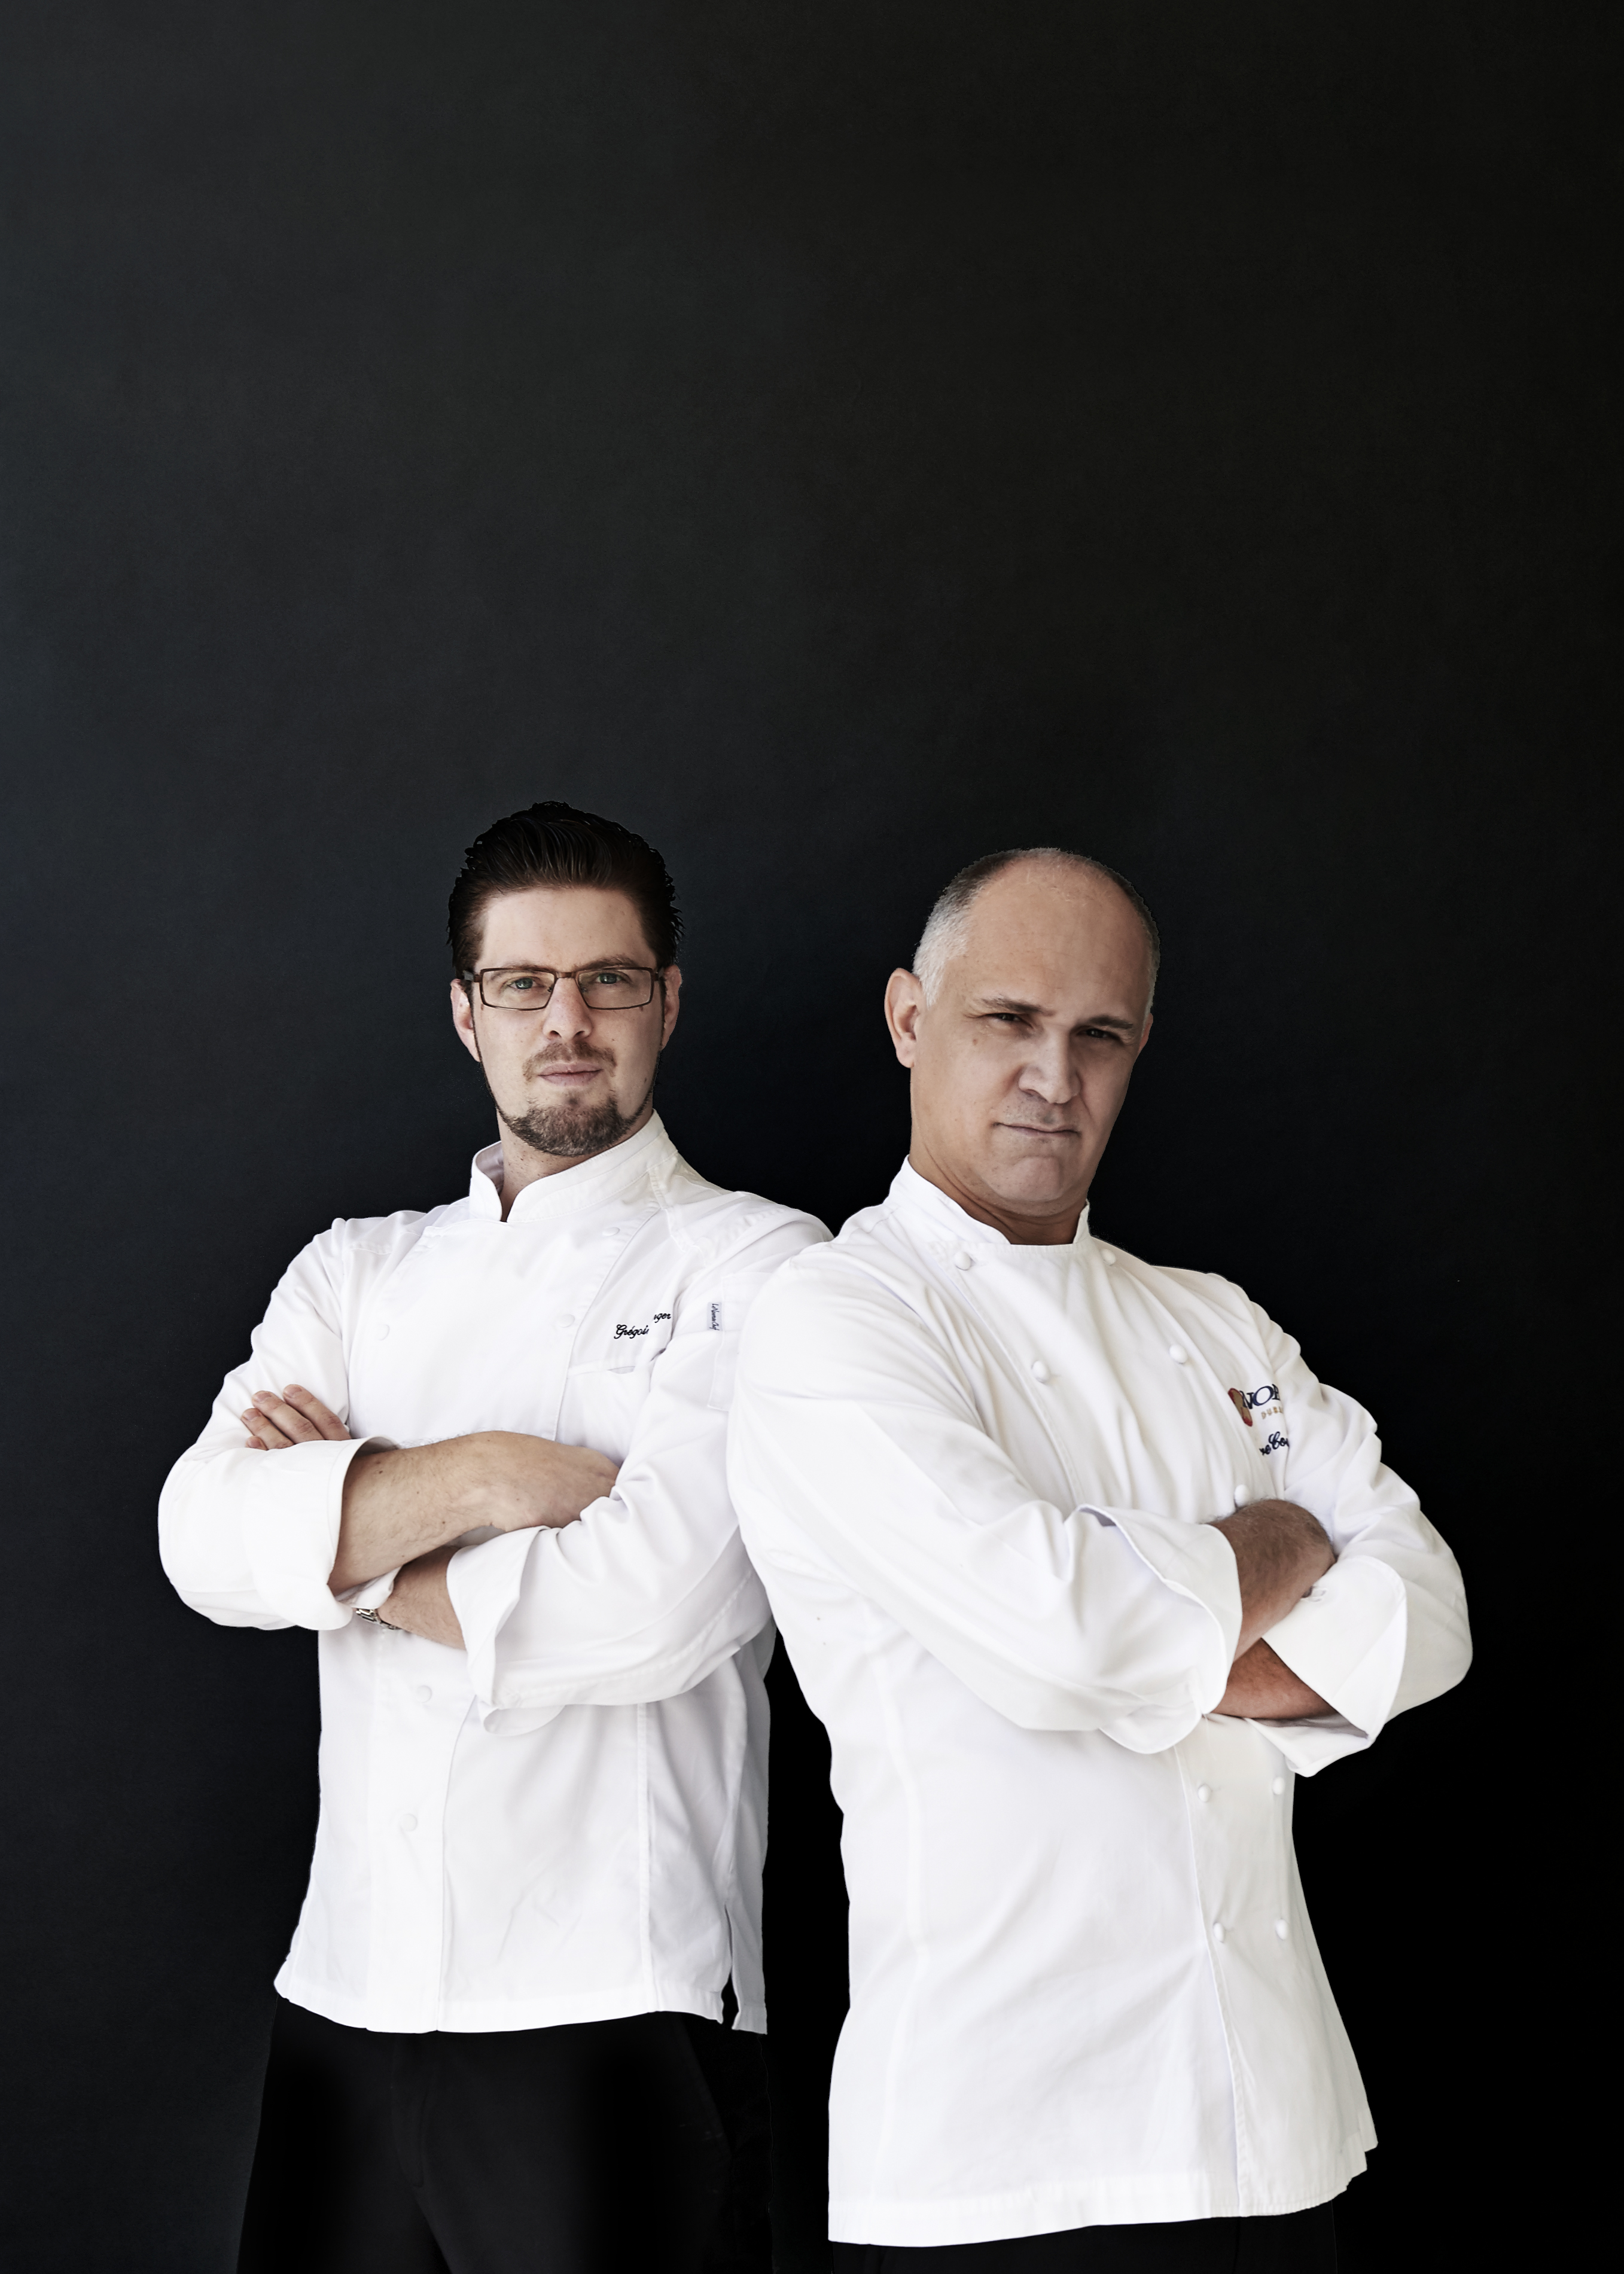 Chefs Gregoire Berger of Ossiano and Herve Courtot of Nobu.